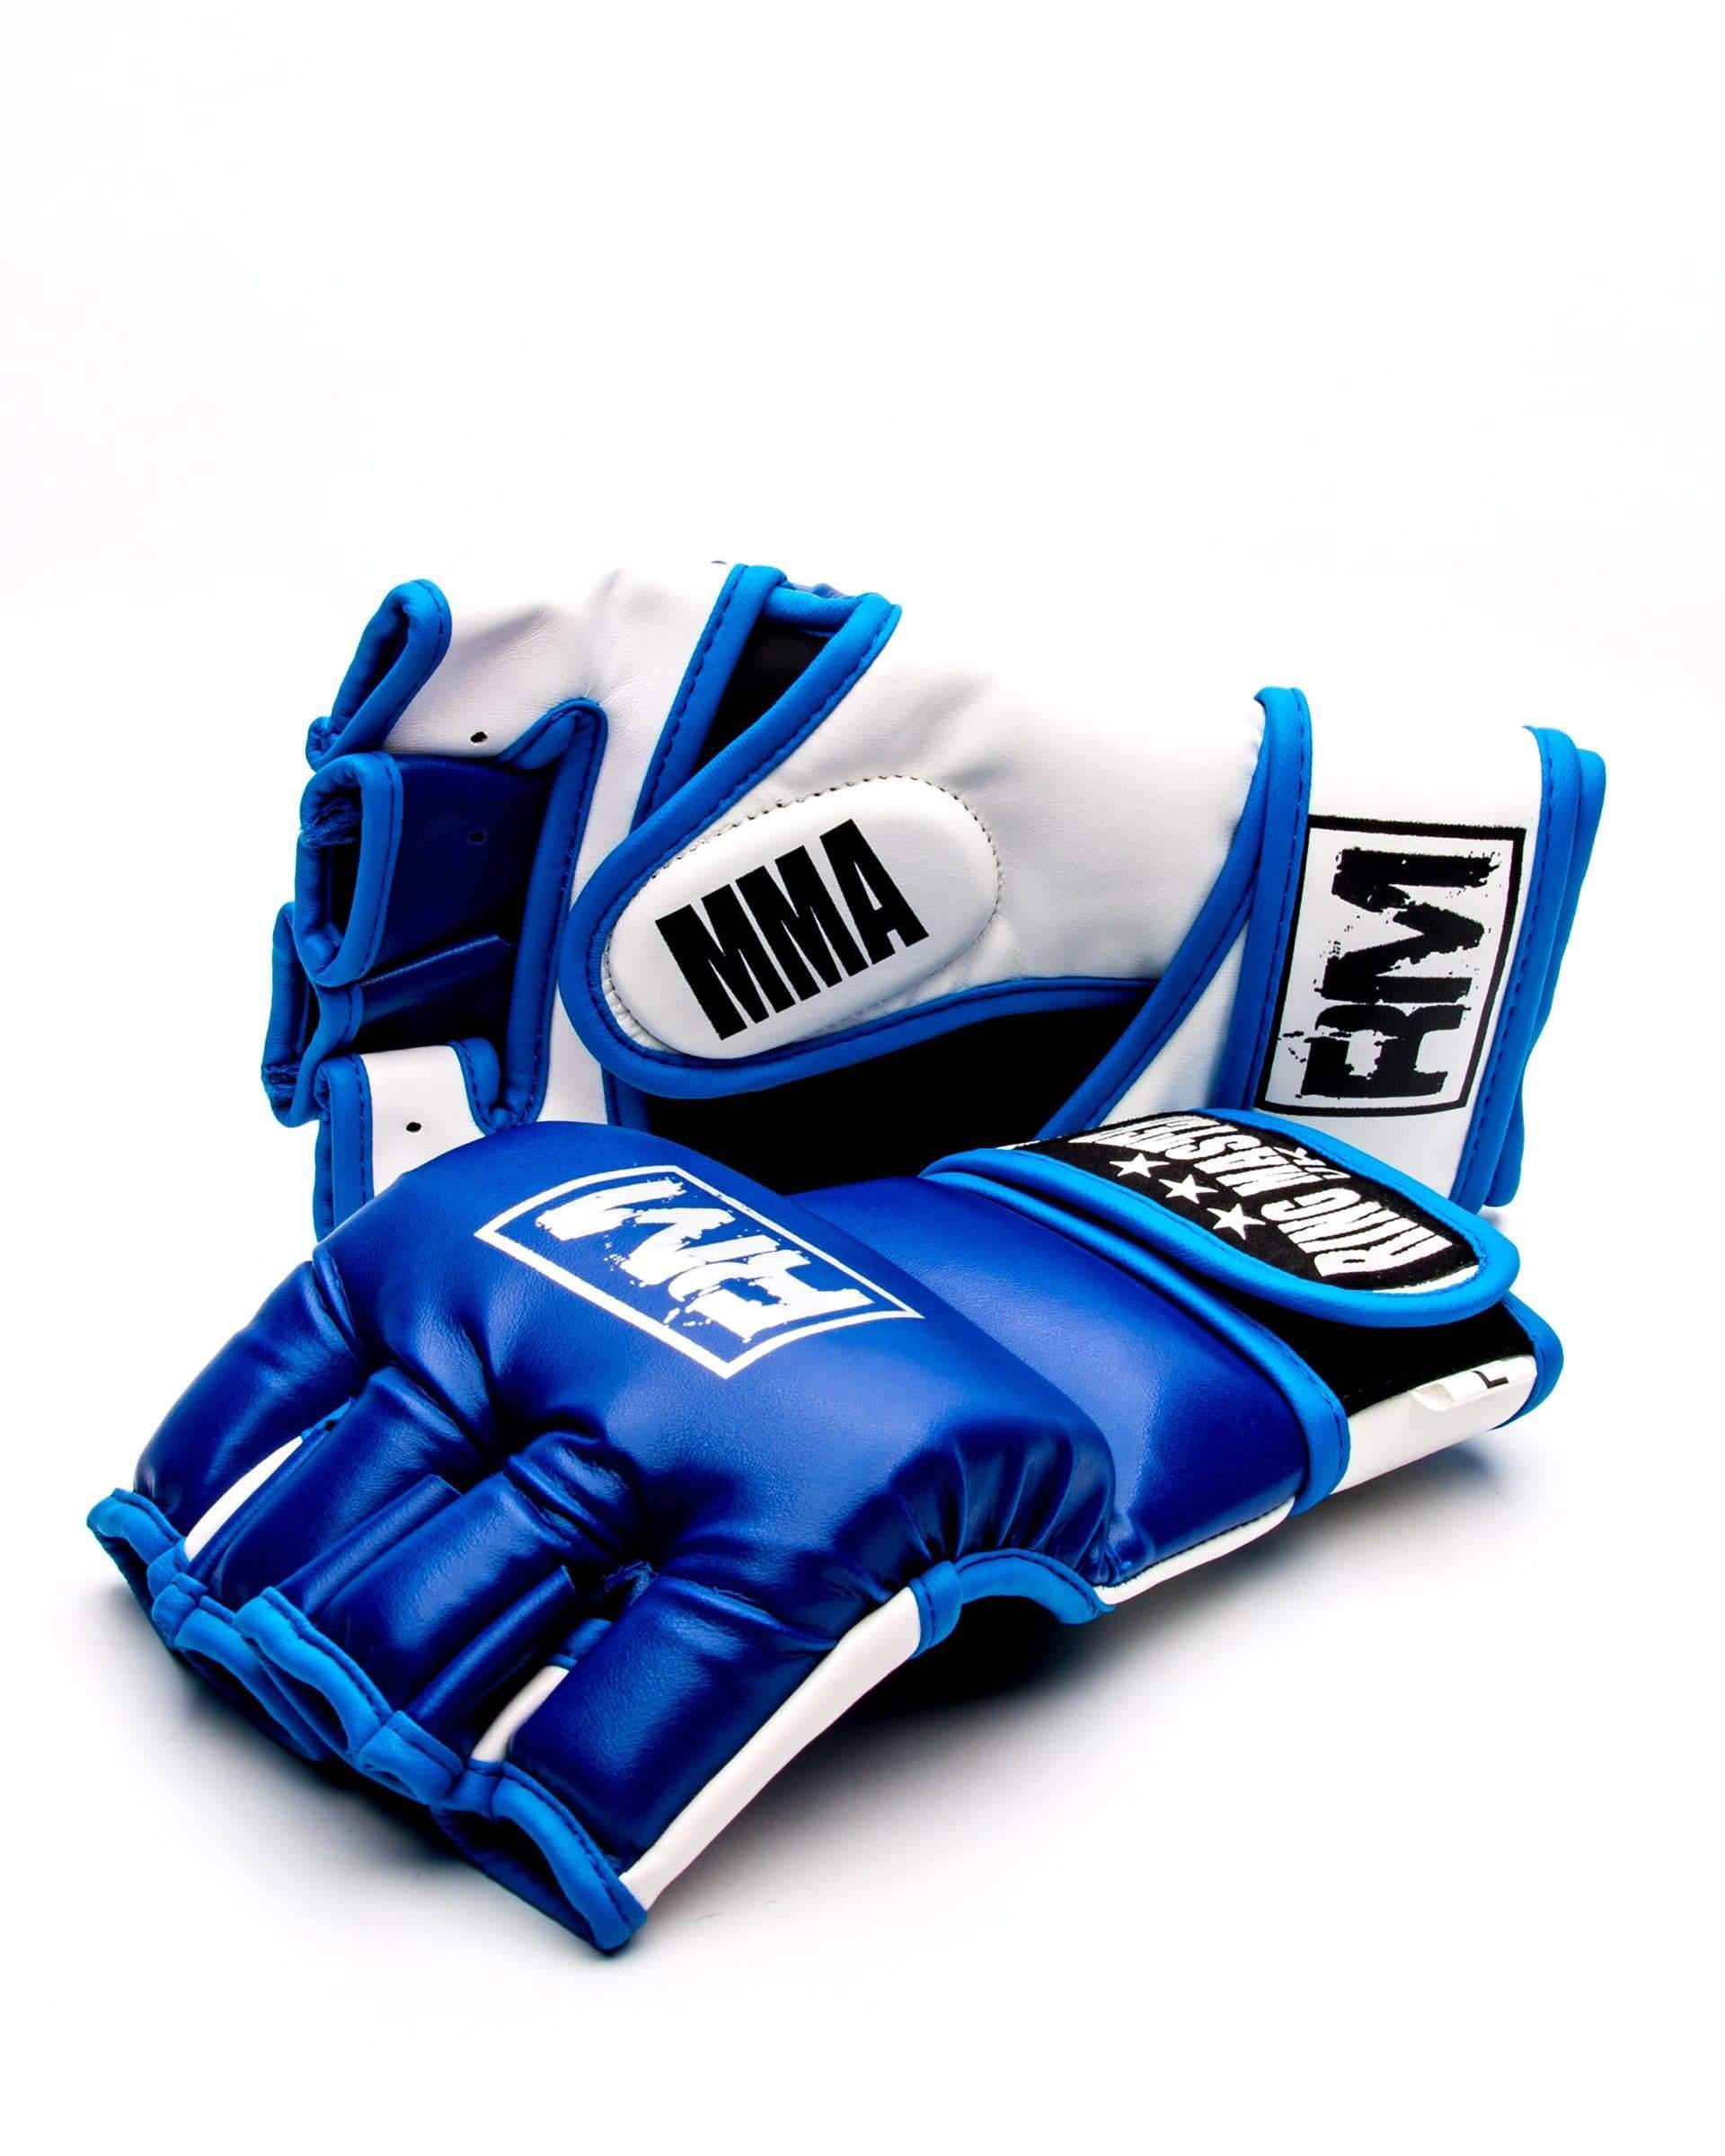 RingMaster Sports MMA Gloves Synthetic Leather Blue and White Image 2